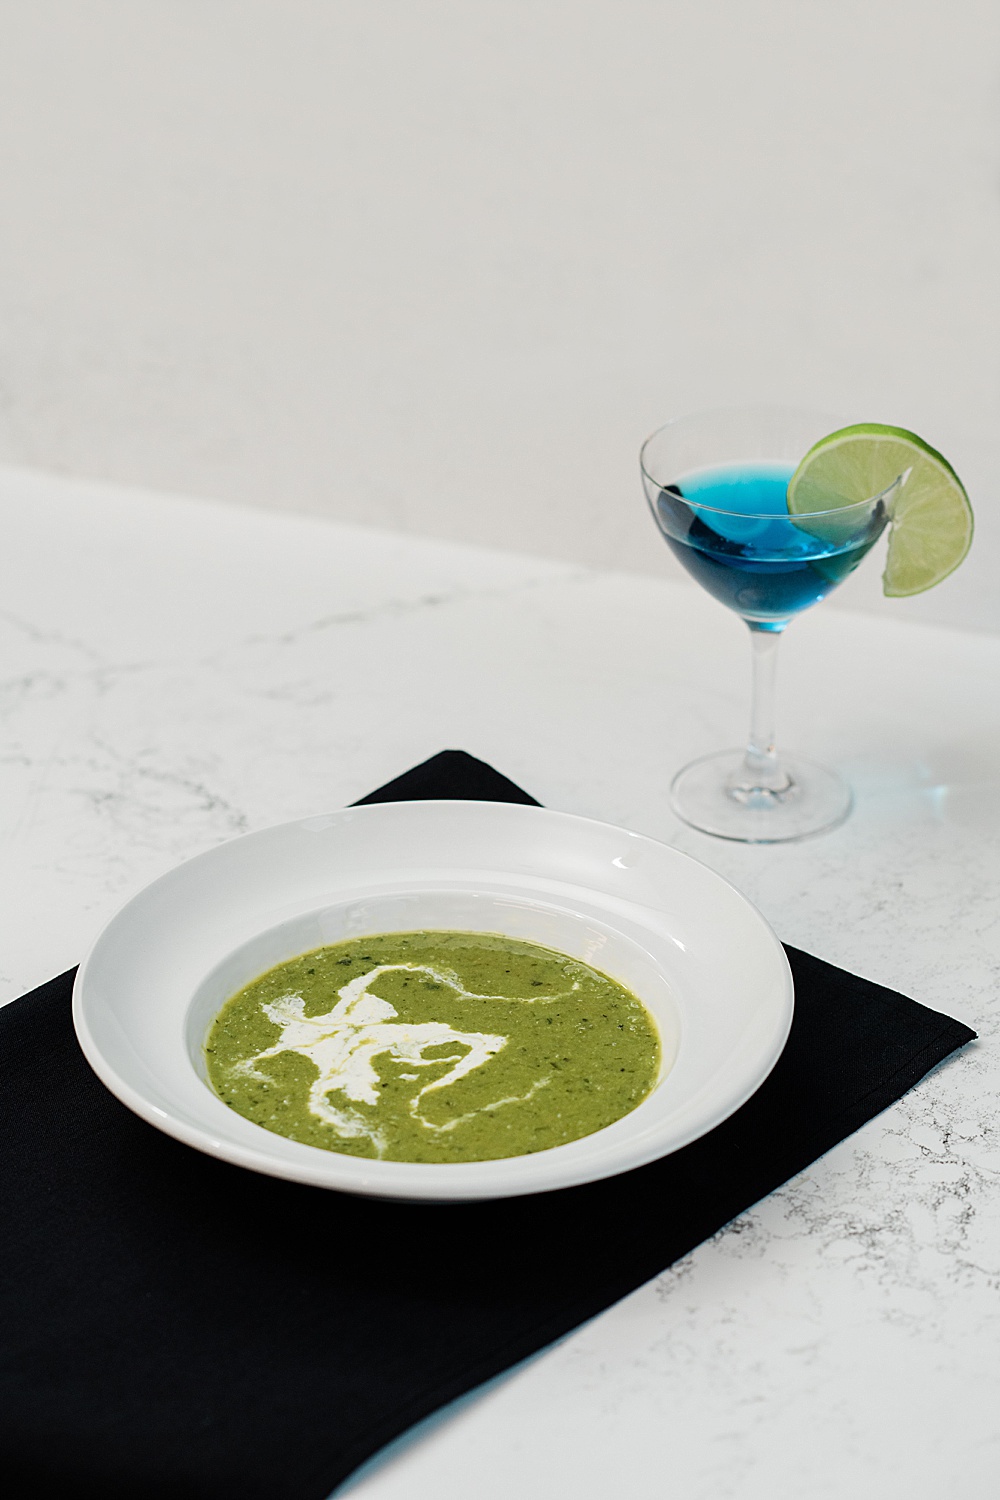 East Lansing's Graduate Hotel School Spirits Dinner, photo a split pea soup and blue martini drink with a lime, by Allie Siarto & Co. Photography, Lansing commercial photographer